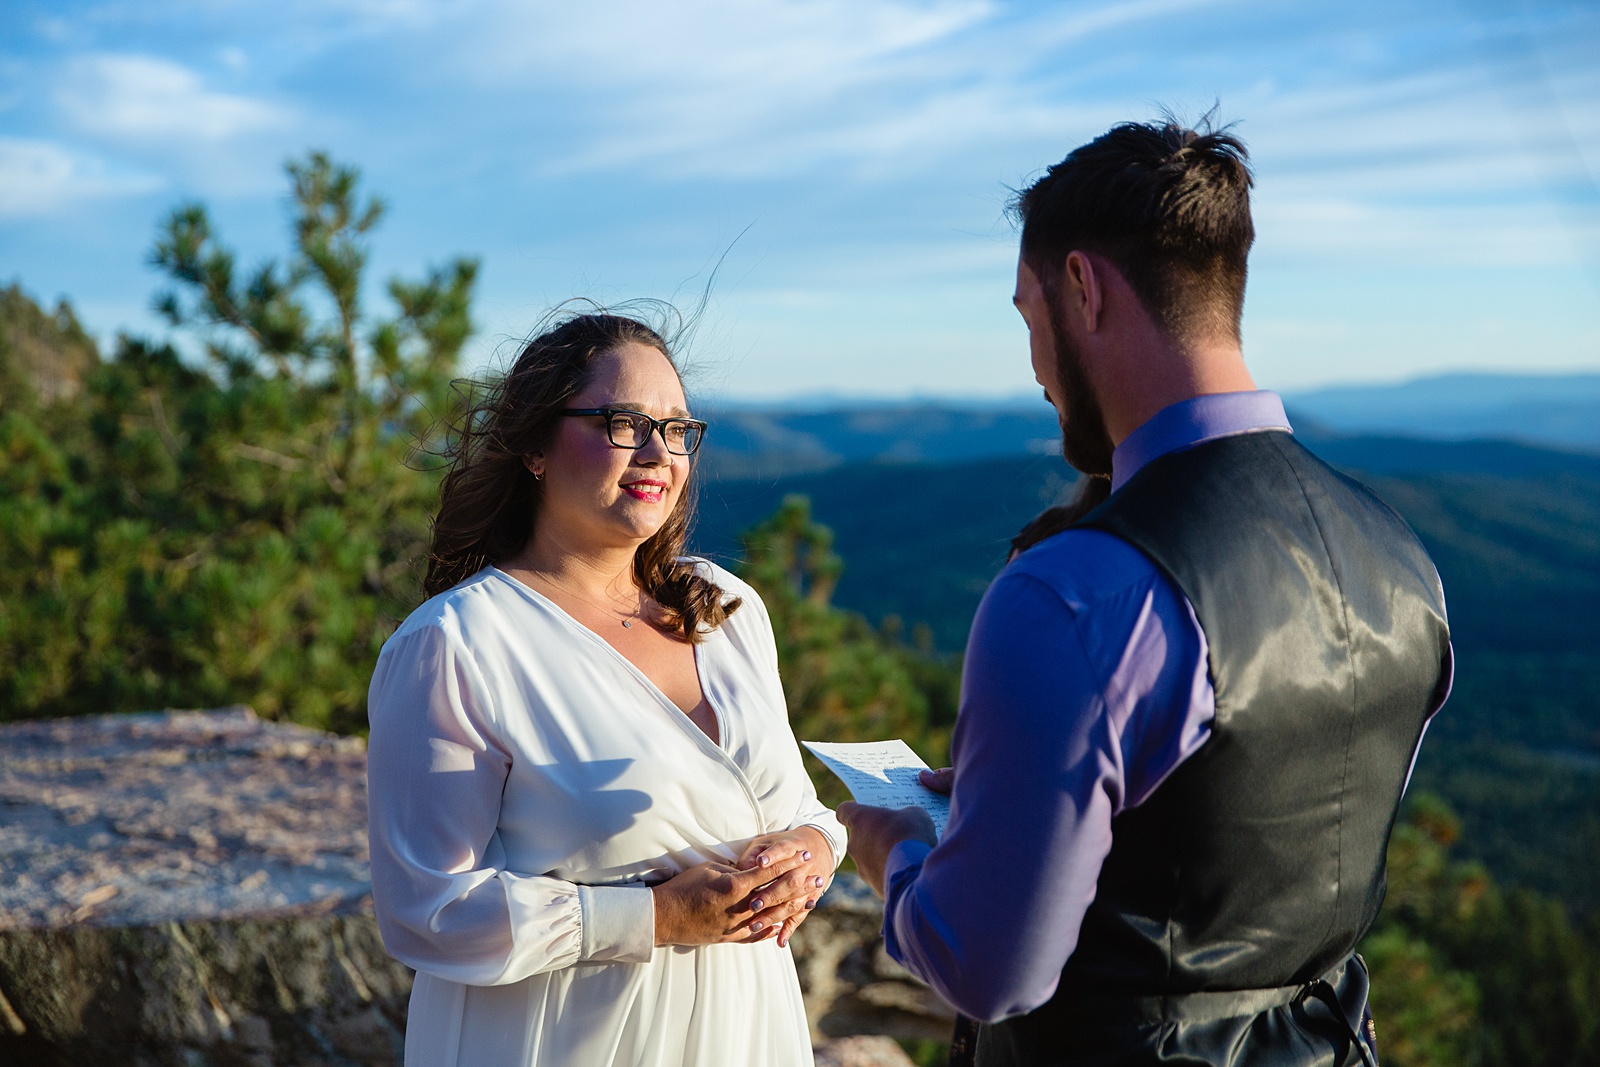 Groom reading his vows during their wedding ceremony at Mogollon Rim by Payson elopement photographer PMA Photography.